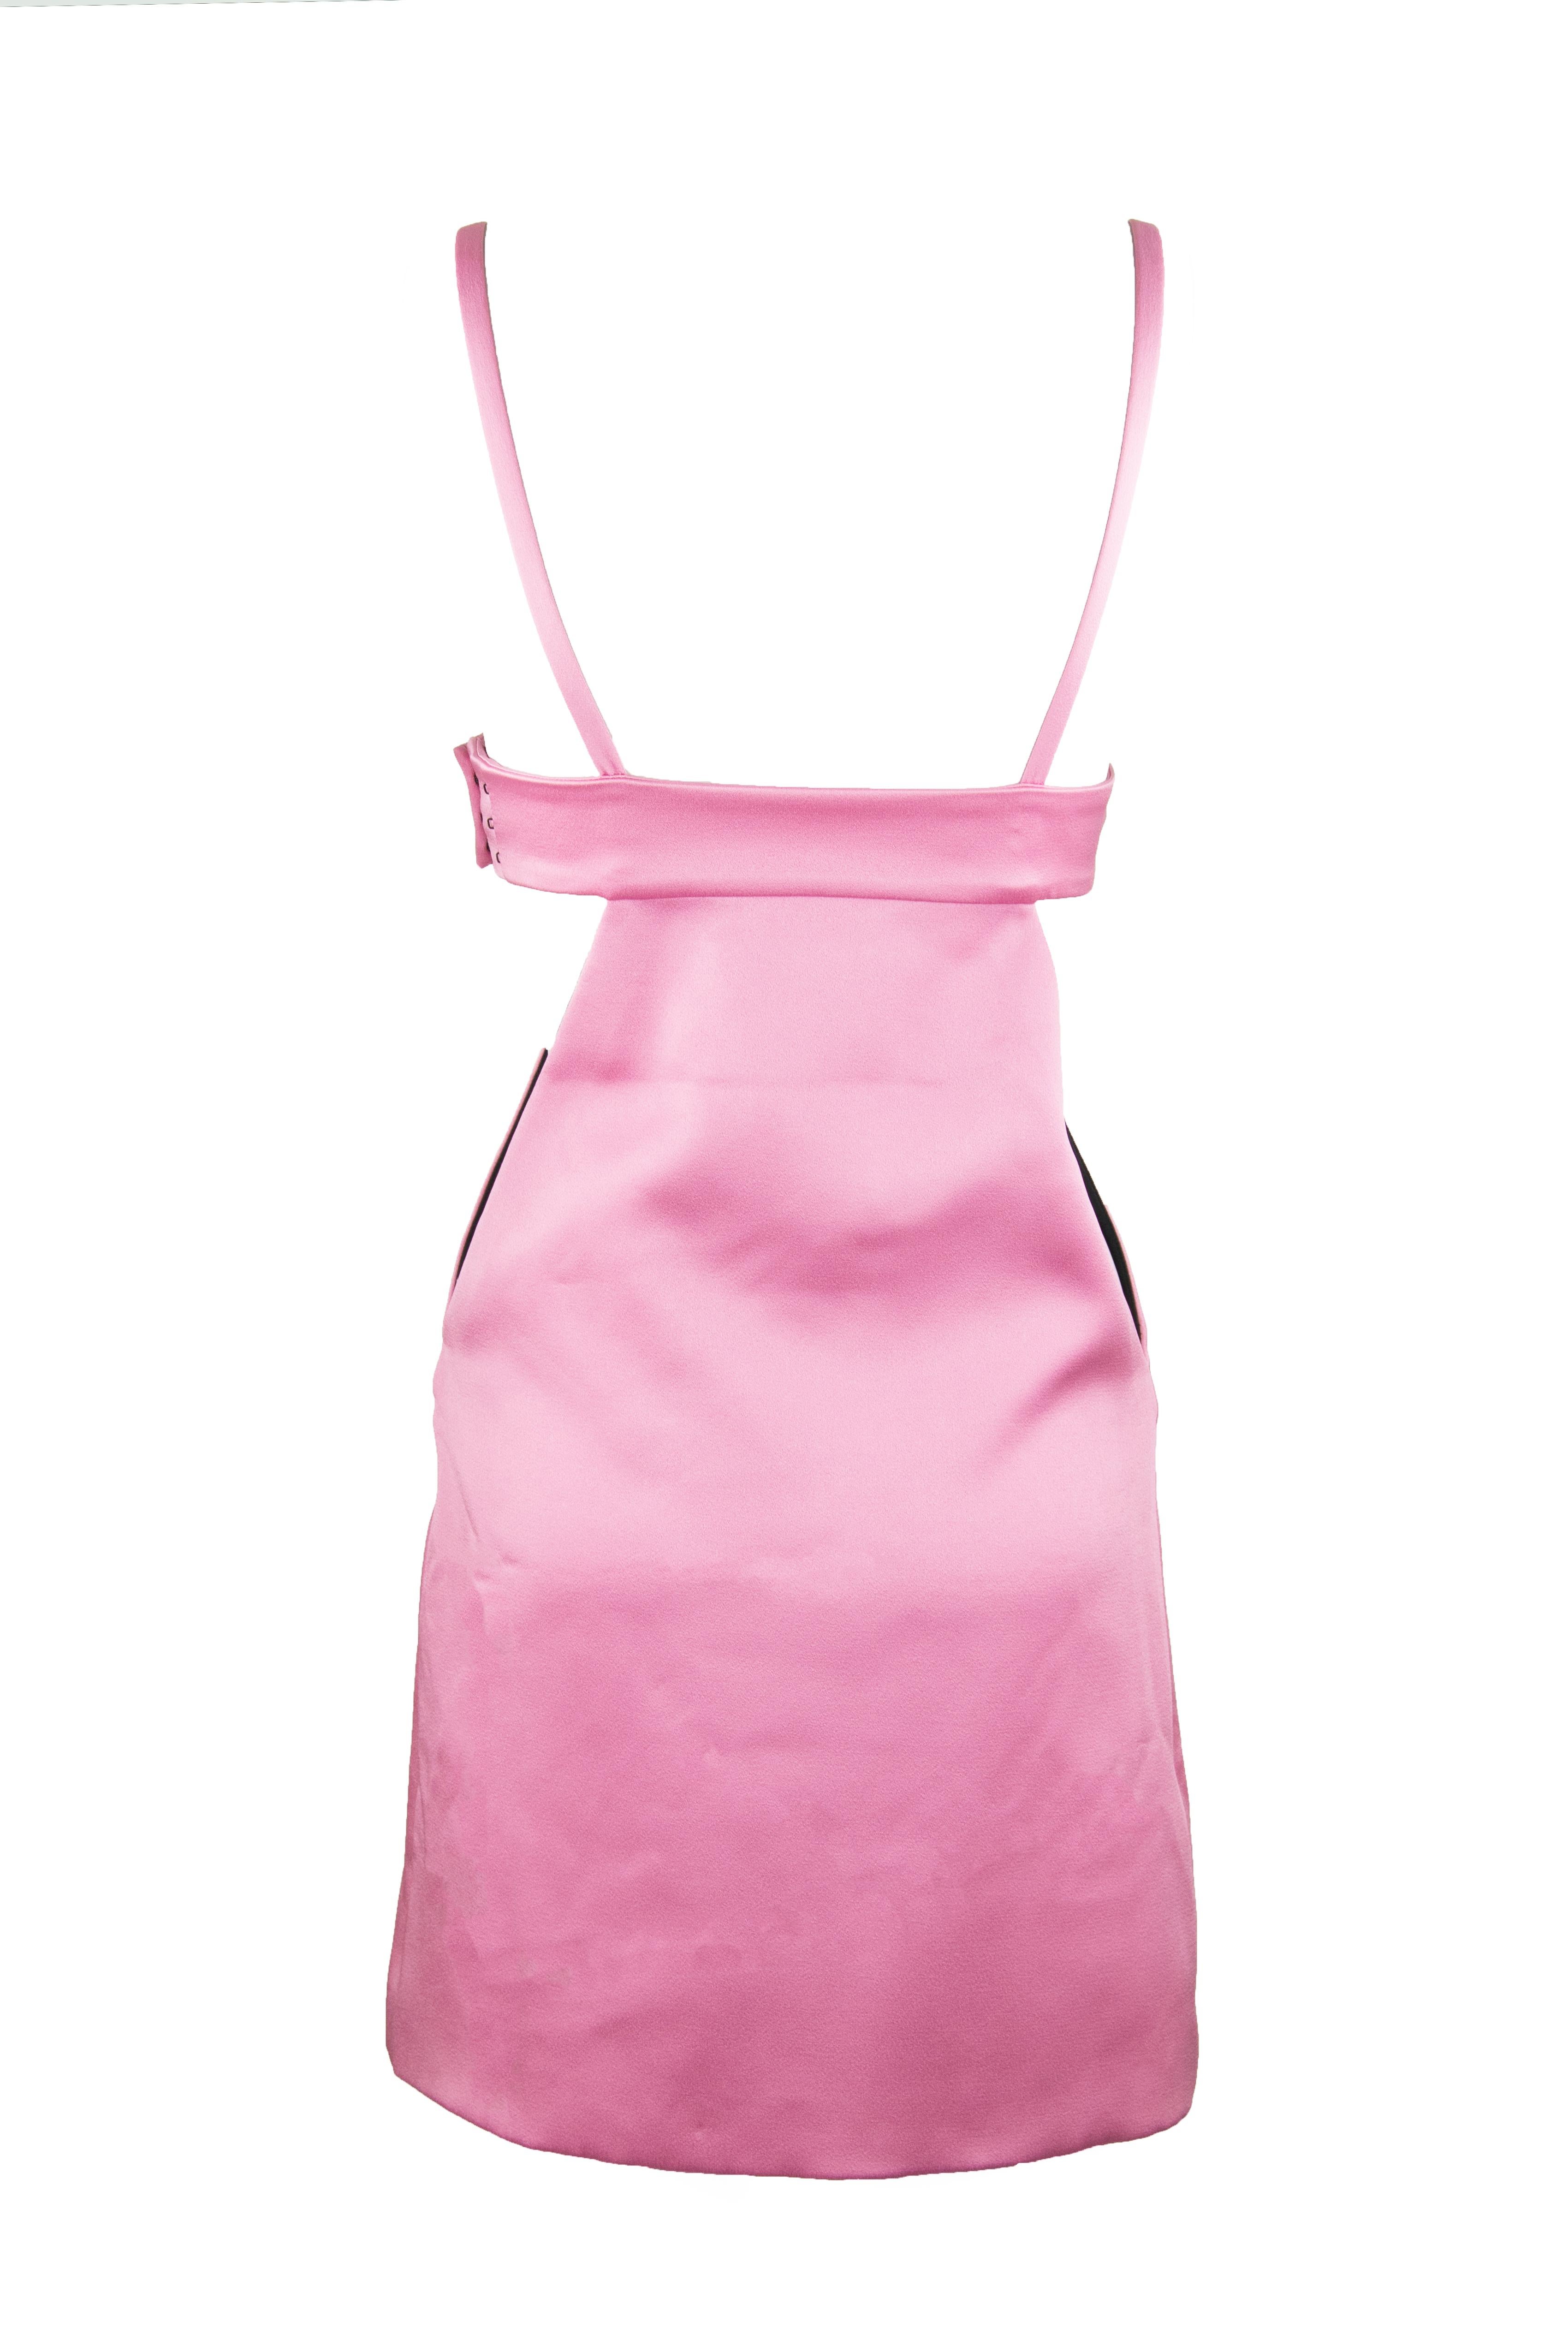 Fausto Puglisi Pink Cut Out Dress with Medallions  im Zustand „Neu“ in Newport, RI